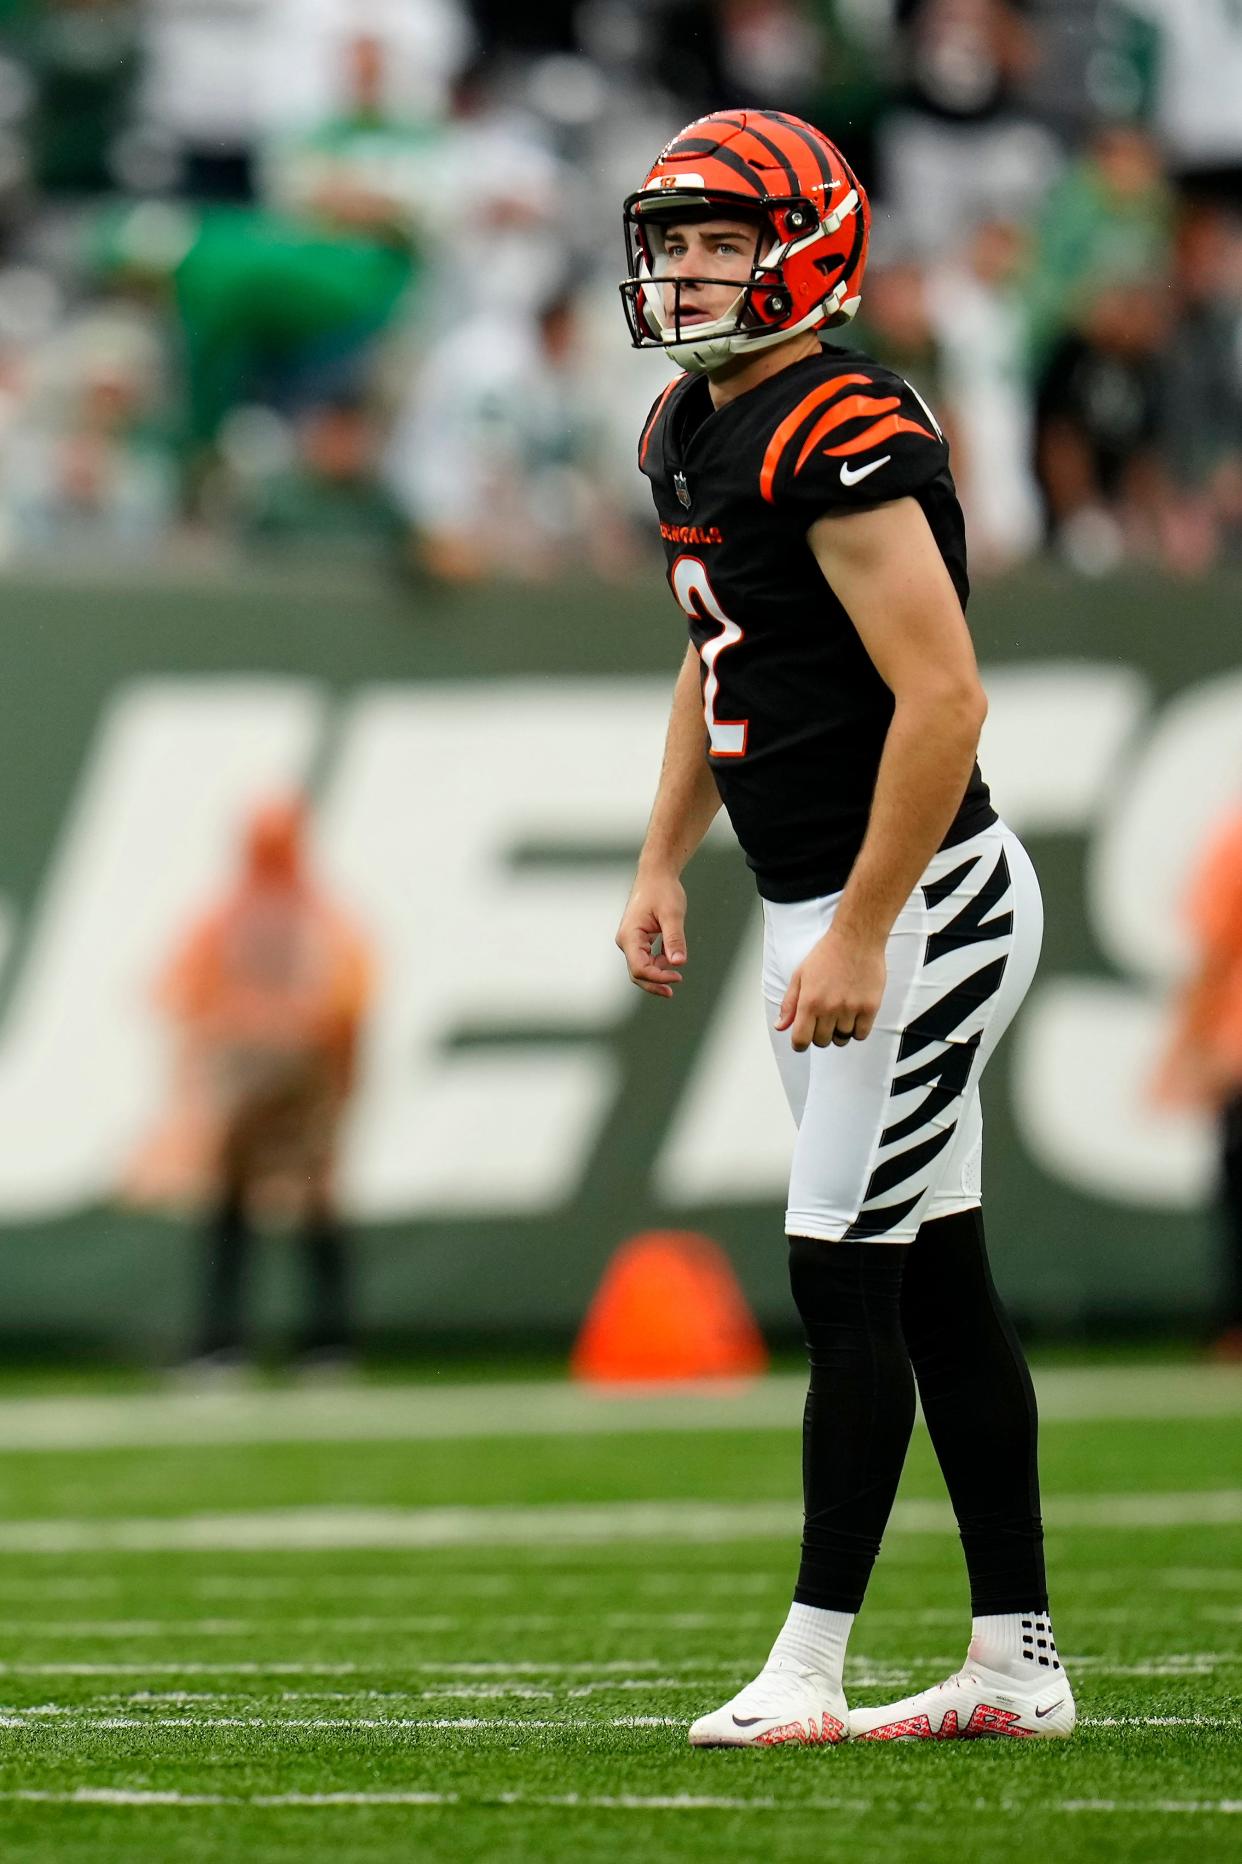 Cincinnati Bengals place kicker Evan McPherson lines up for a field goal attempt during the Bengals' game against the New York Jets on Sept. 25, 2022. The Bengals play the Miami Dolphins at Paycor Stadium on Sept. 29, 2022.